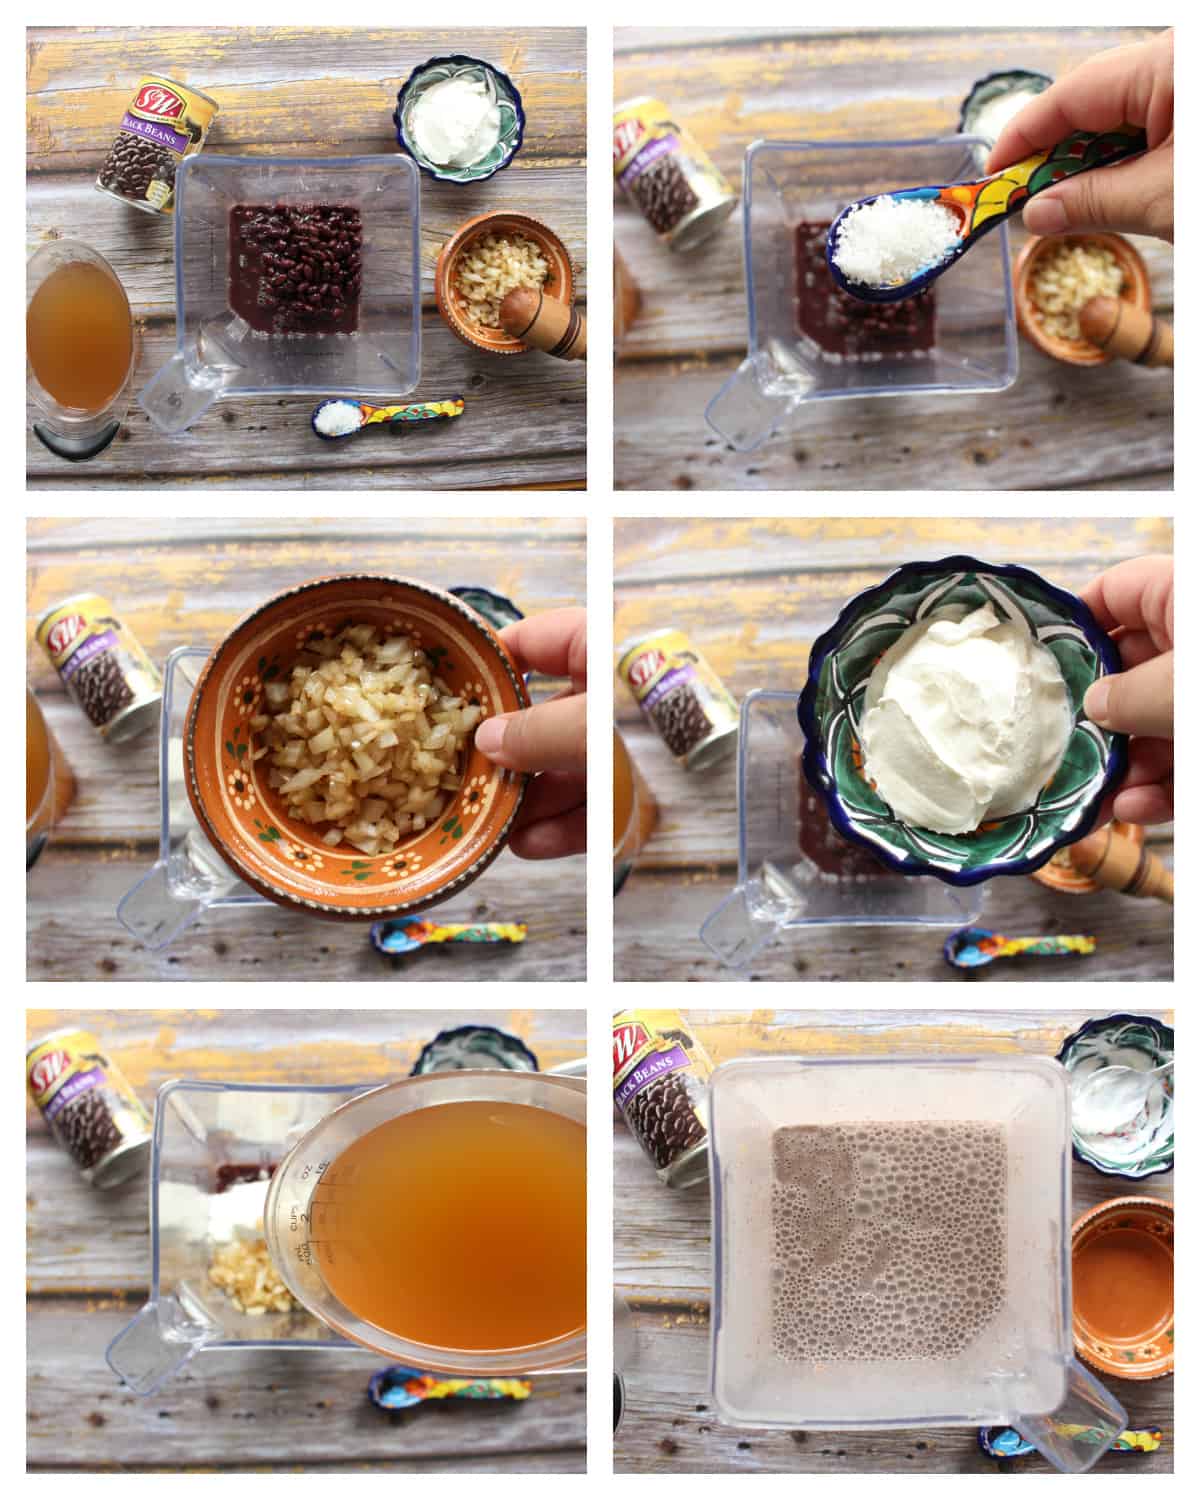 A collage showing how to make the crema de frijol in a blender.